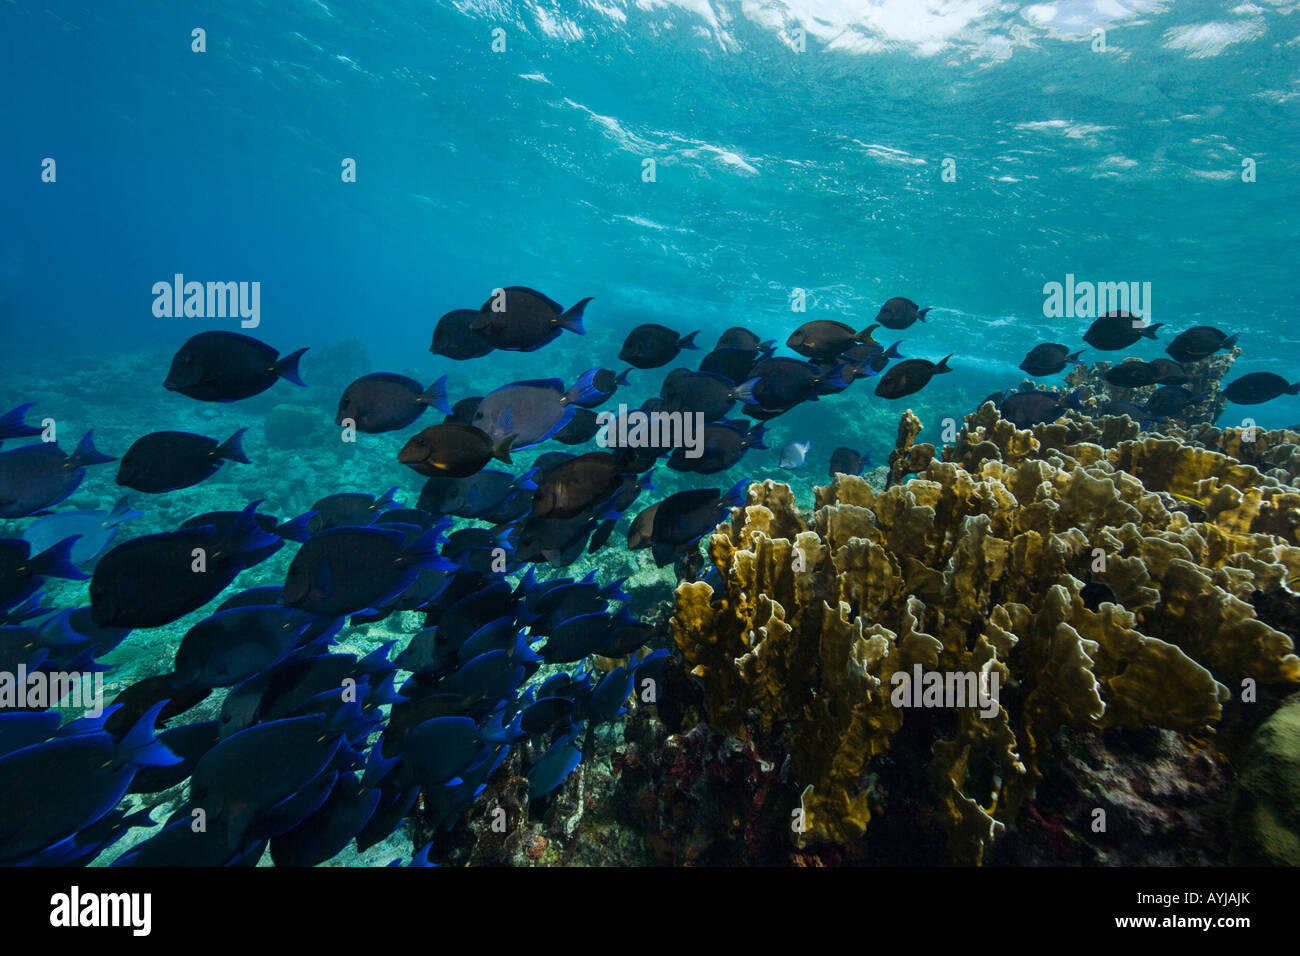 Schooling fish and coral Bonaire Netherland Antillies Stock Photo